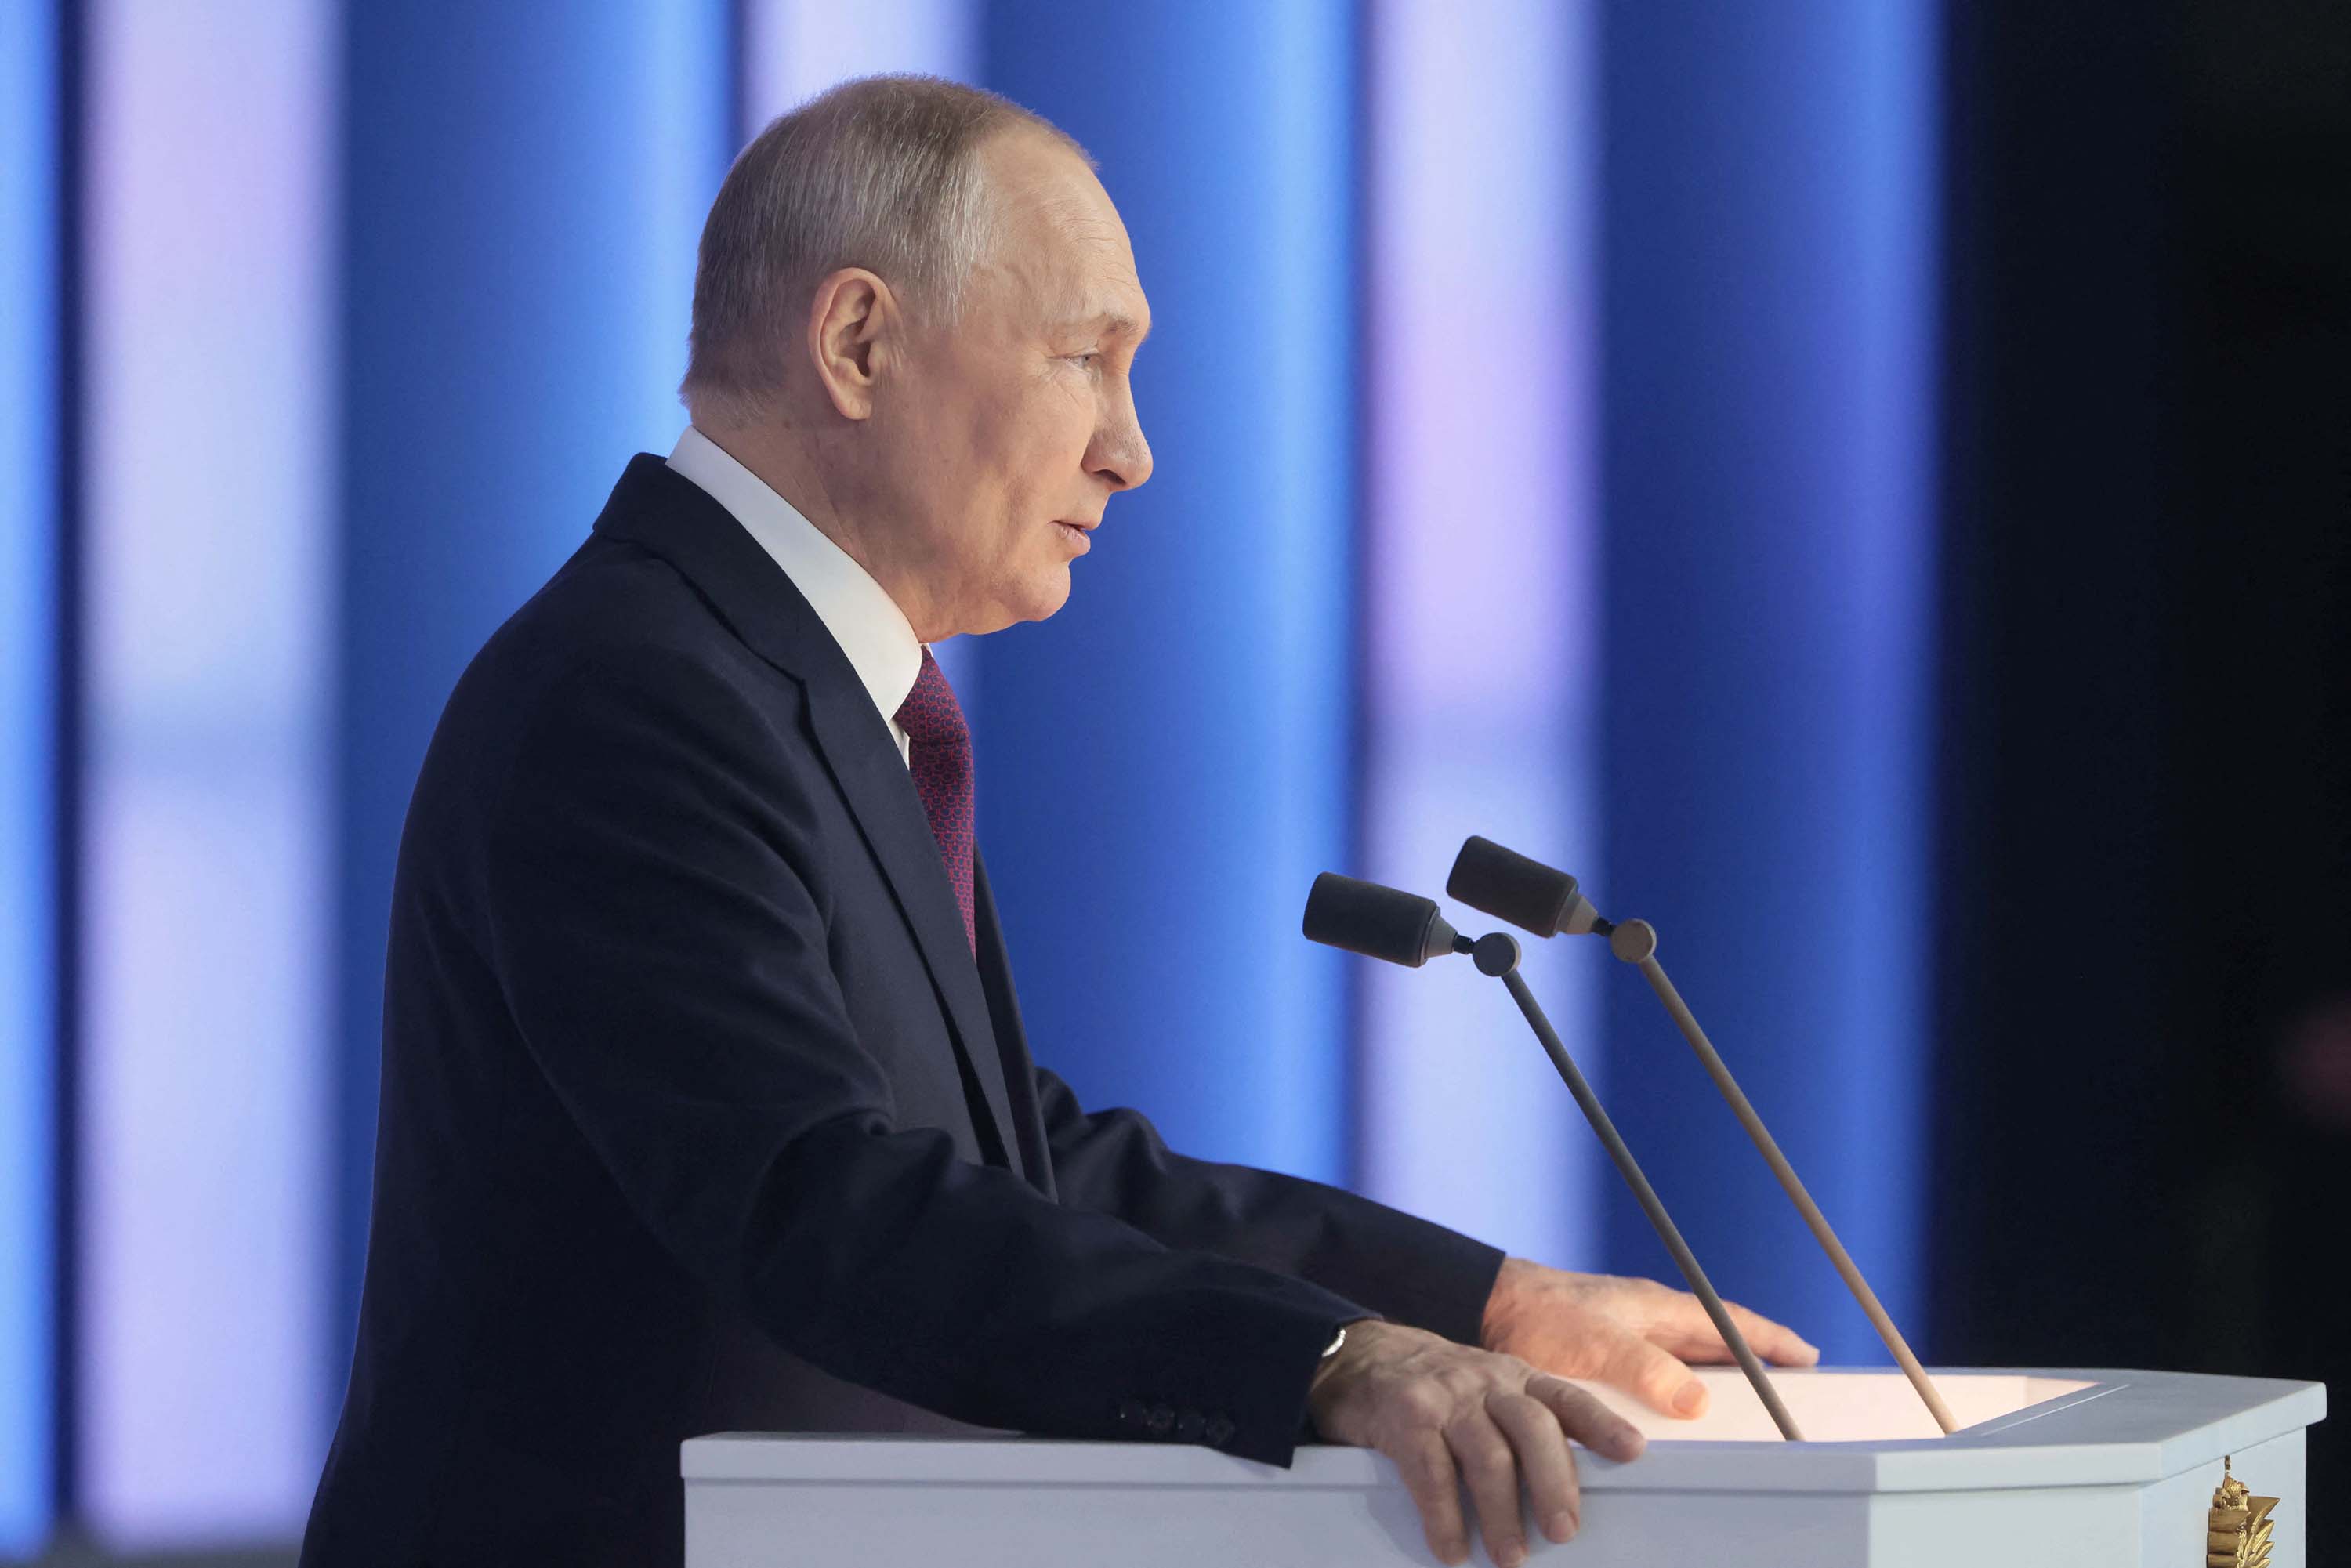 NextImg:Russia is suspending its participation in New START nuclear weapons treaty, Putin says